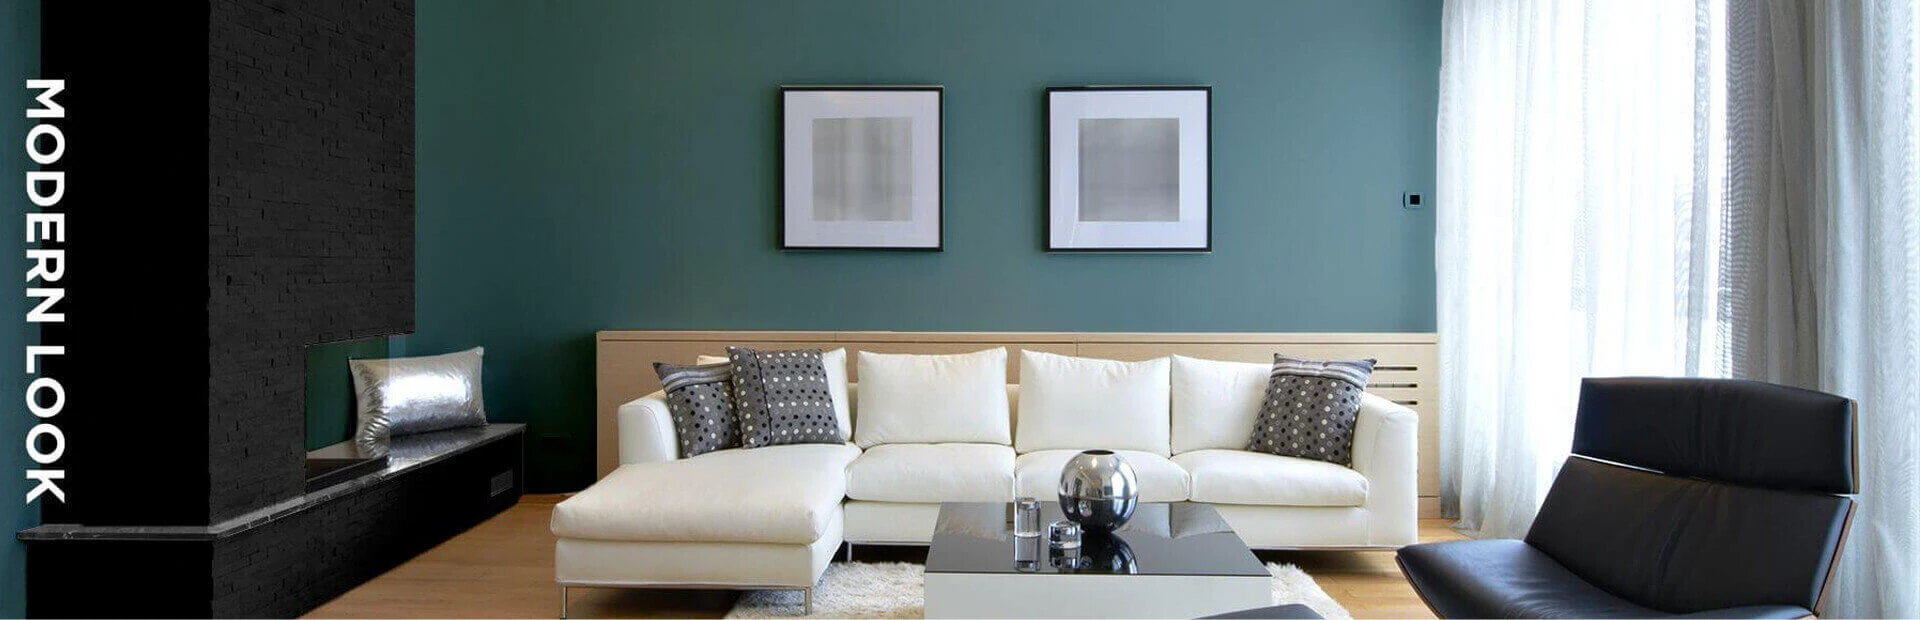 Modern-looking living room with black and dark green walls painted by Five Star Painting.